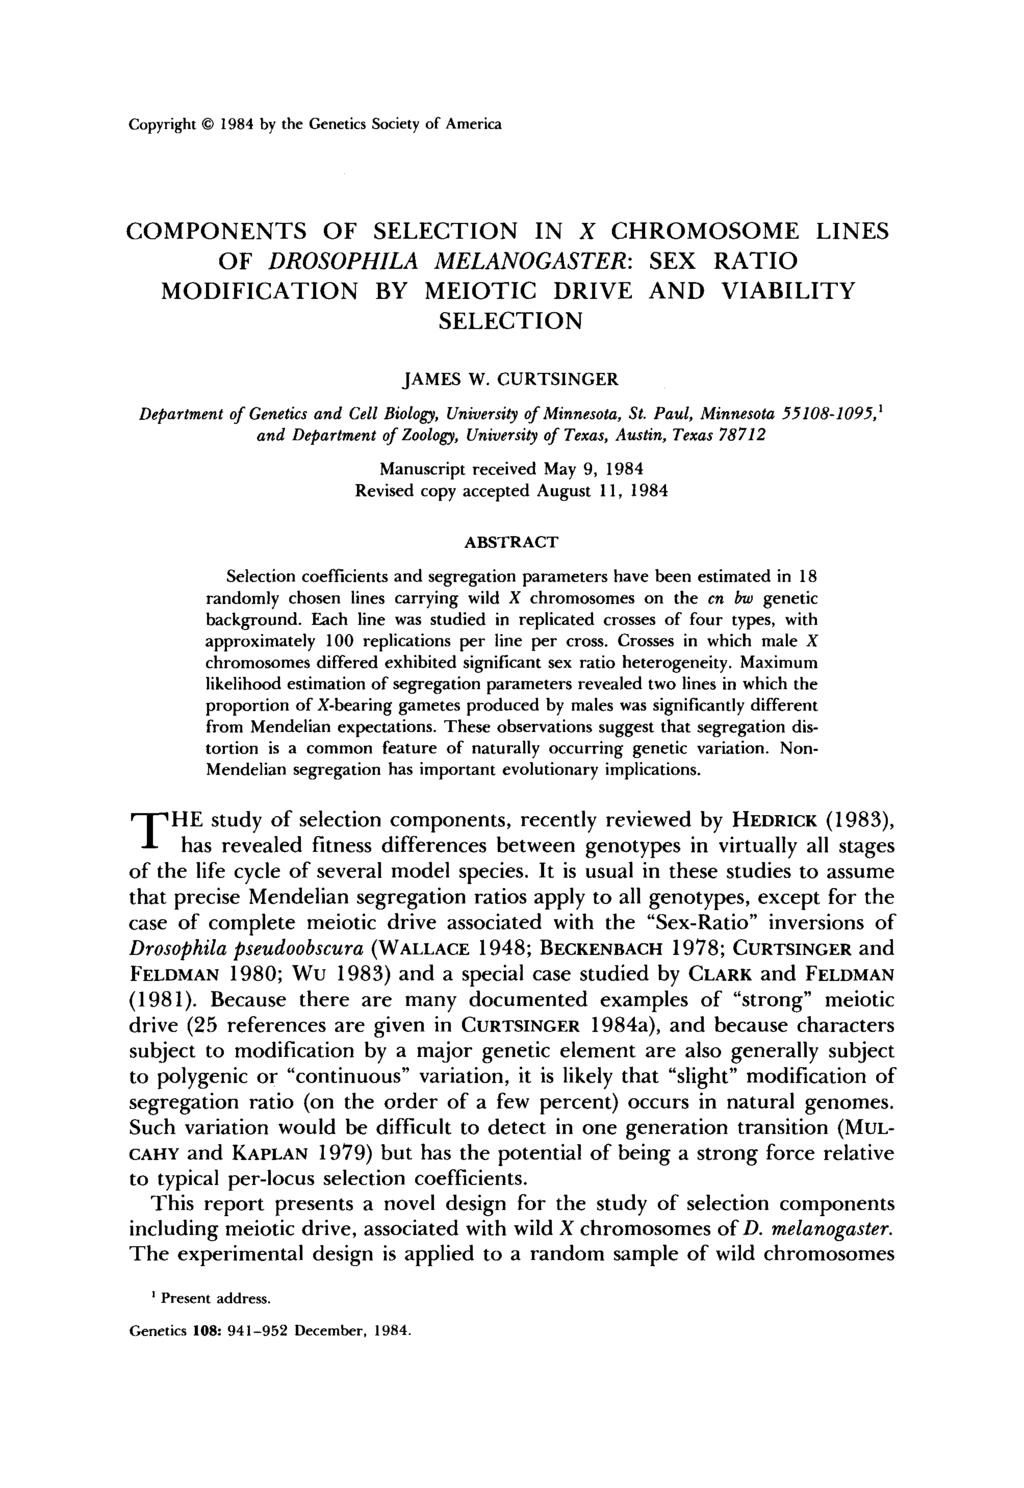 Copyright 0 1984 by the Genetics Society of America COMPONENTS OF SELECTION IN X CHROMOSOME LINES OF DROSOPHILA MELANOGASTER: SEX RATIO MODIFICATION BY MEIOTIC DRIVE AND VIABILITY SELECTION JAMES W.